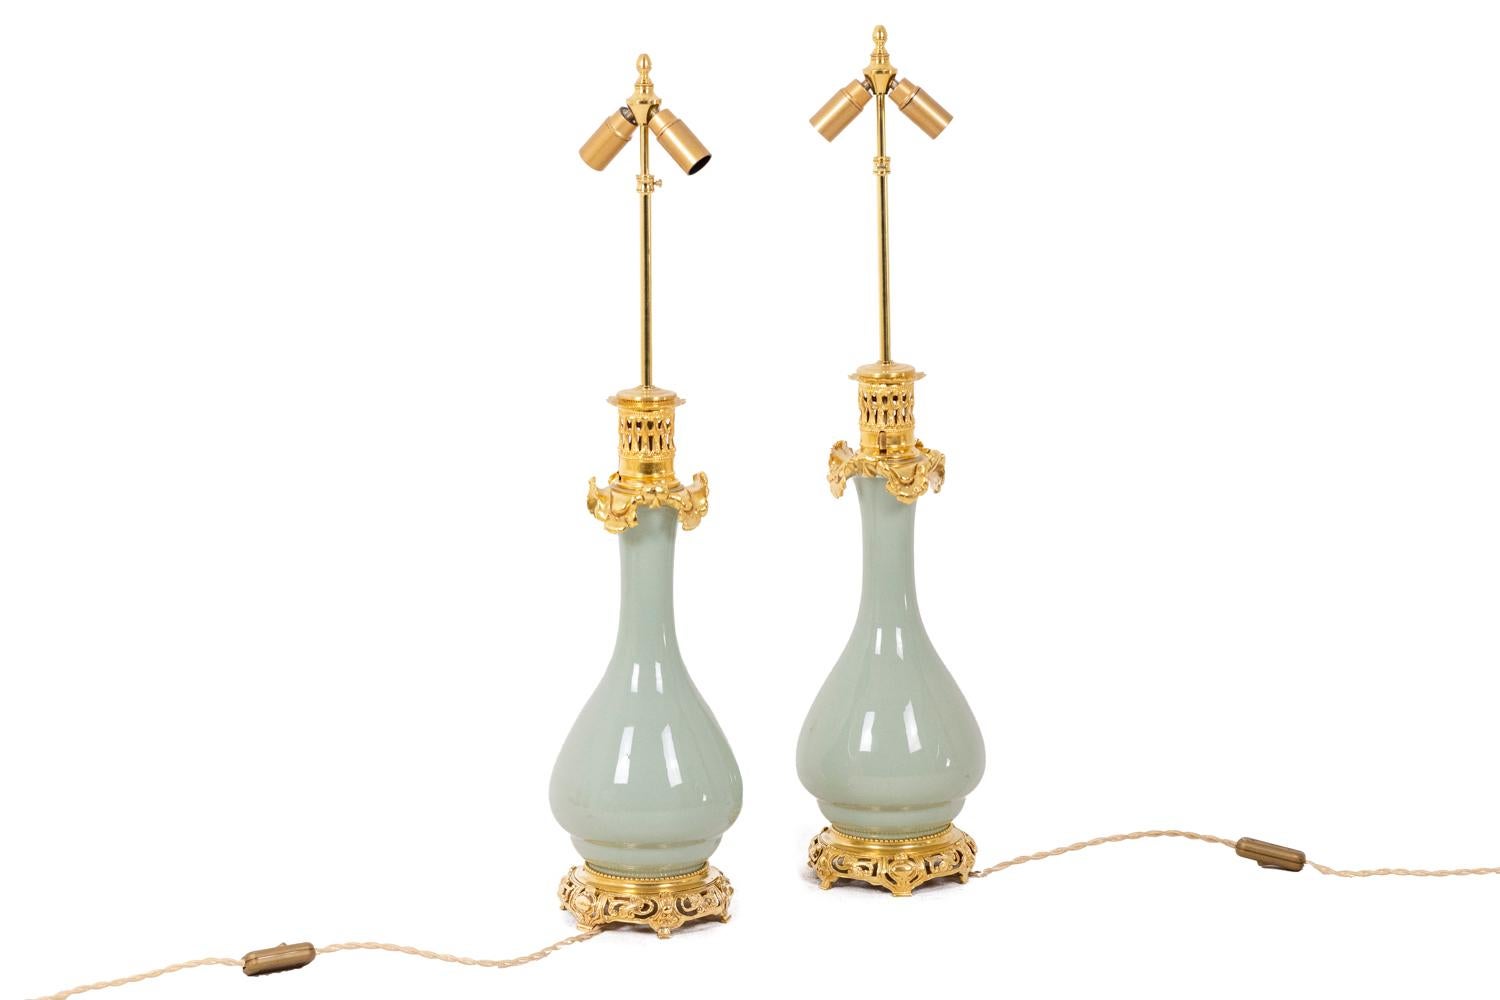 Pair of celadon porcelain lamp, solid color. Gilded and chiseled bronze, the top of the frame presenting an openwork grid and a decoration of wavy leaves. Openwork circular base decorated with scrolls and cartouches, the top of the base decorated